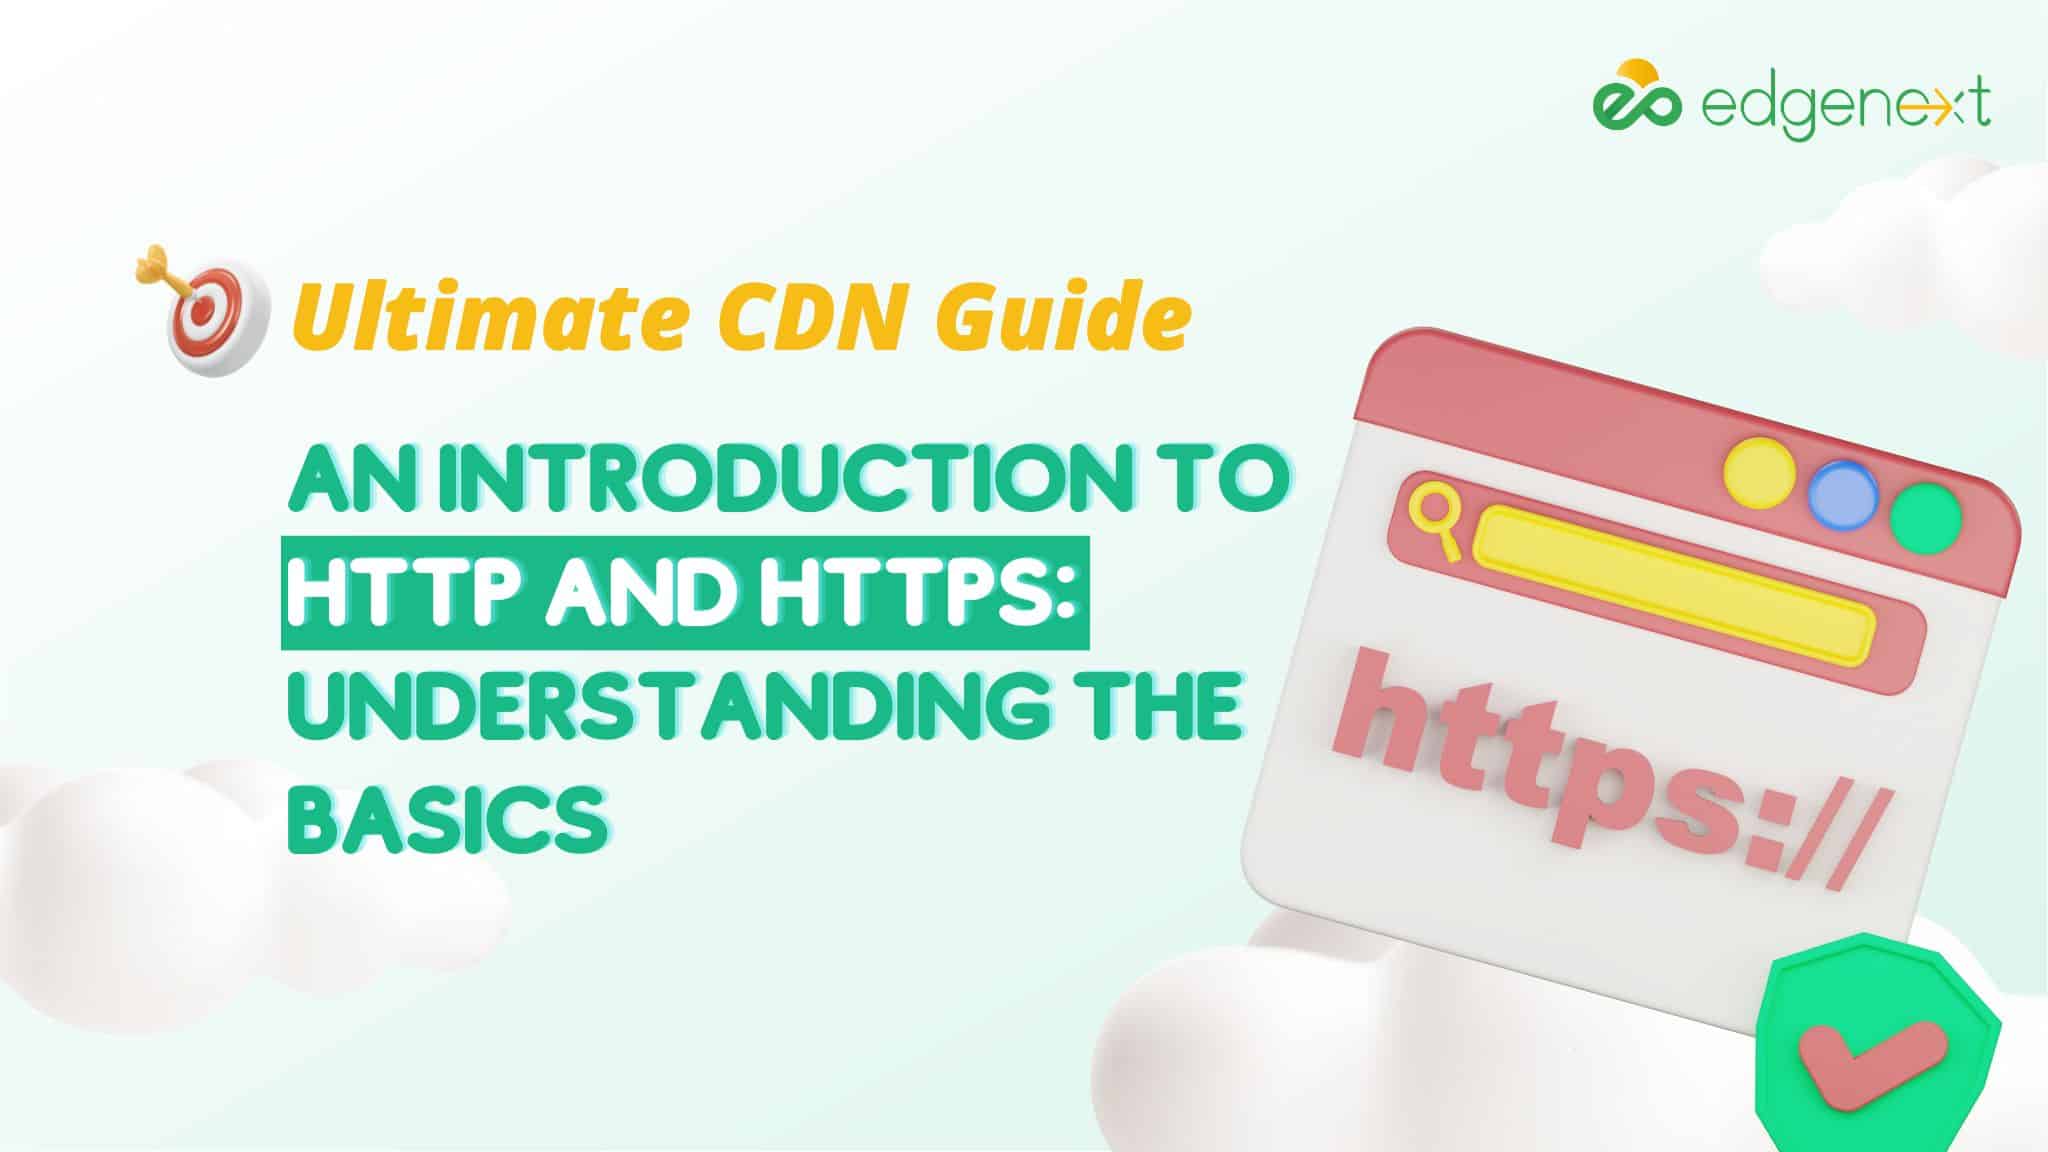 An Introduction to HTTP and HTTPS: Understanding the Basics